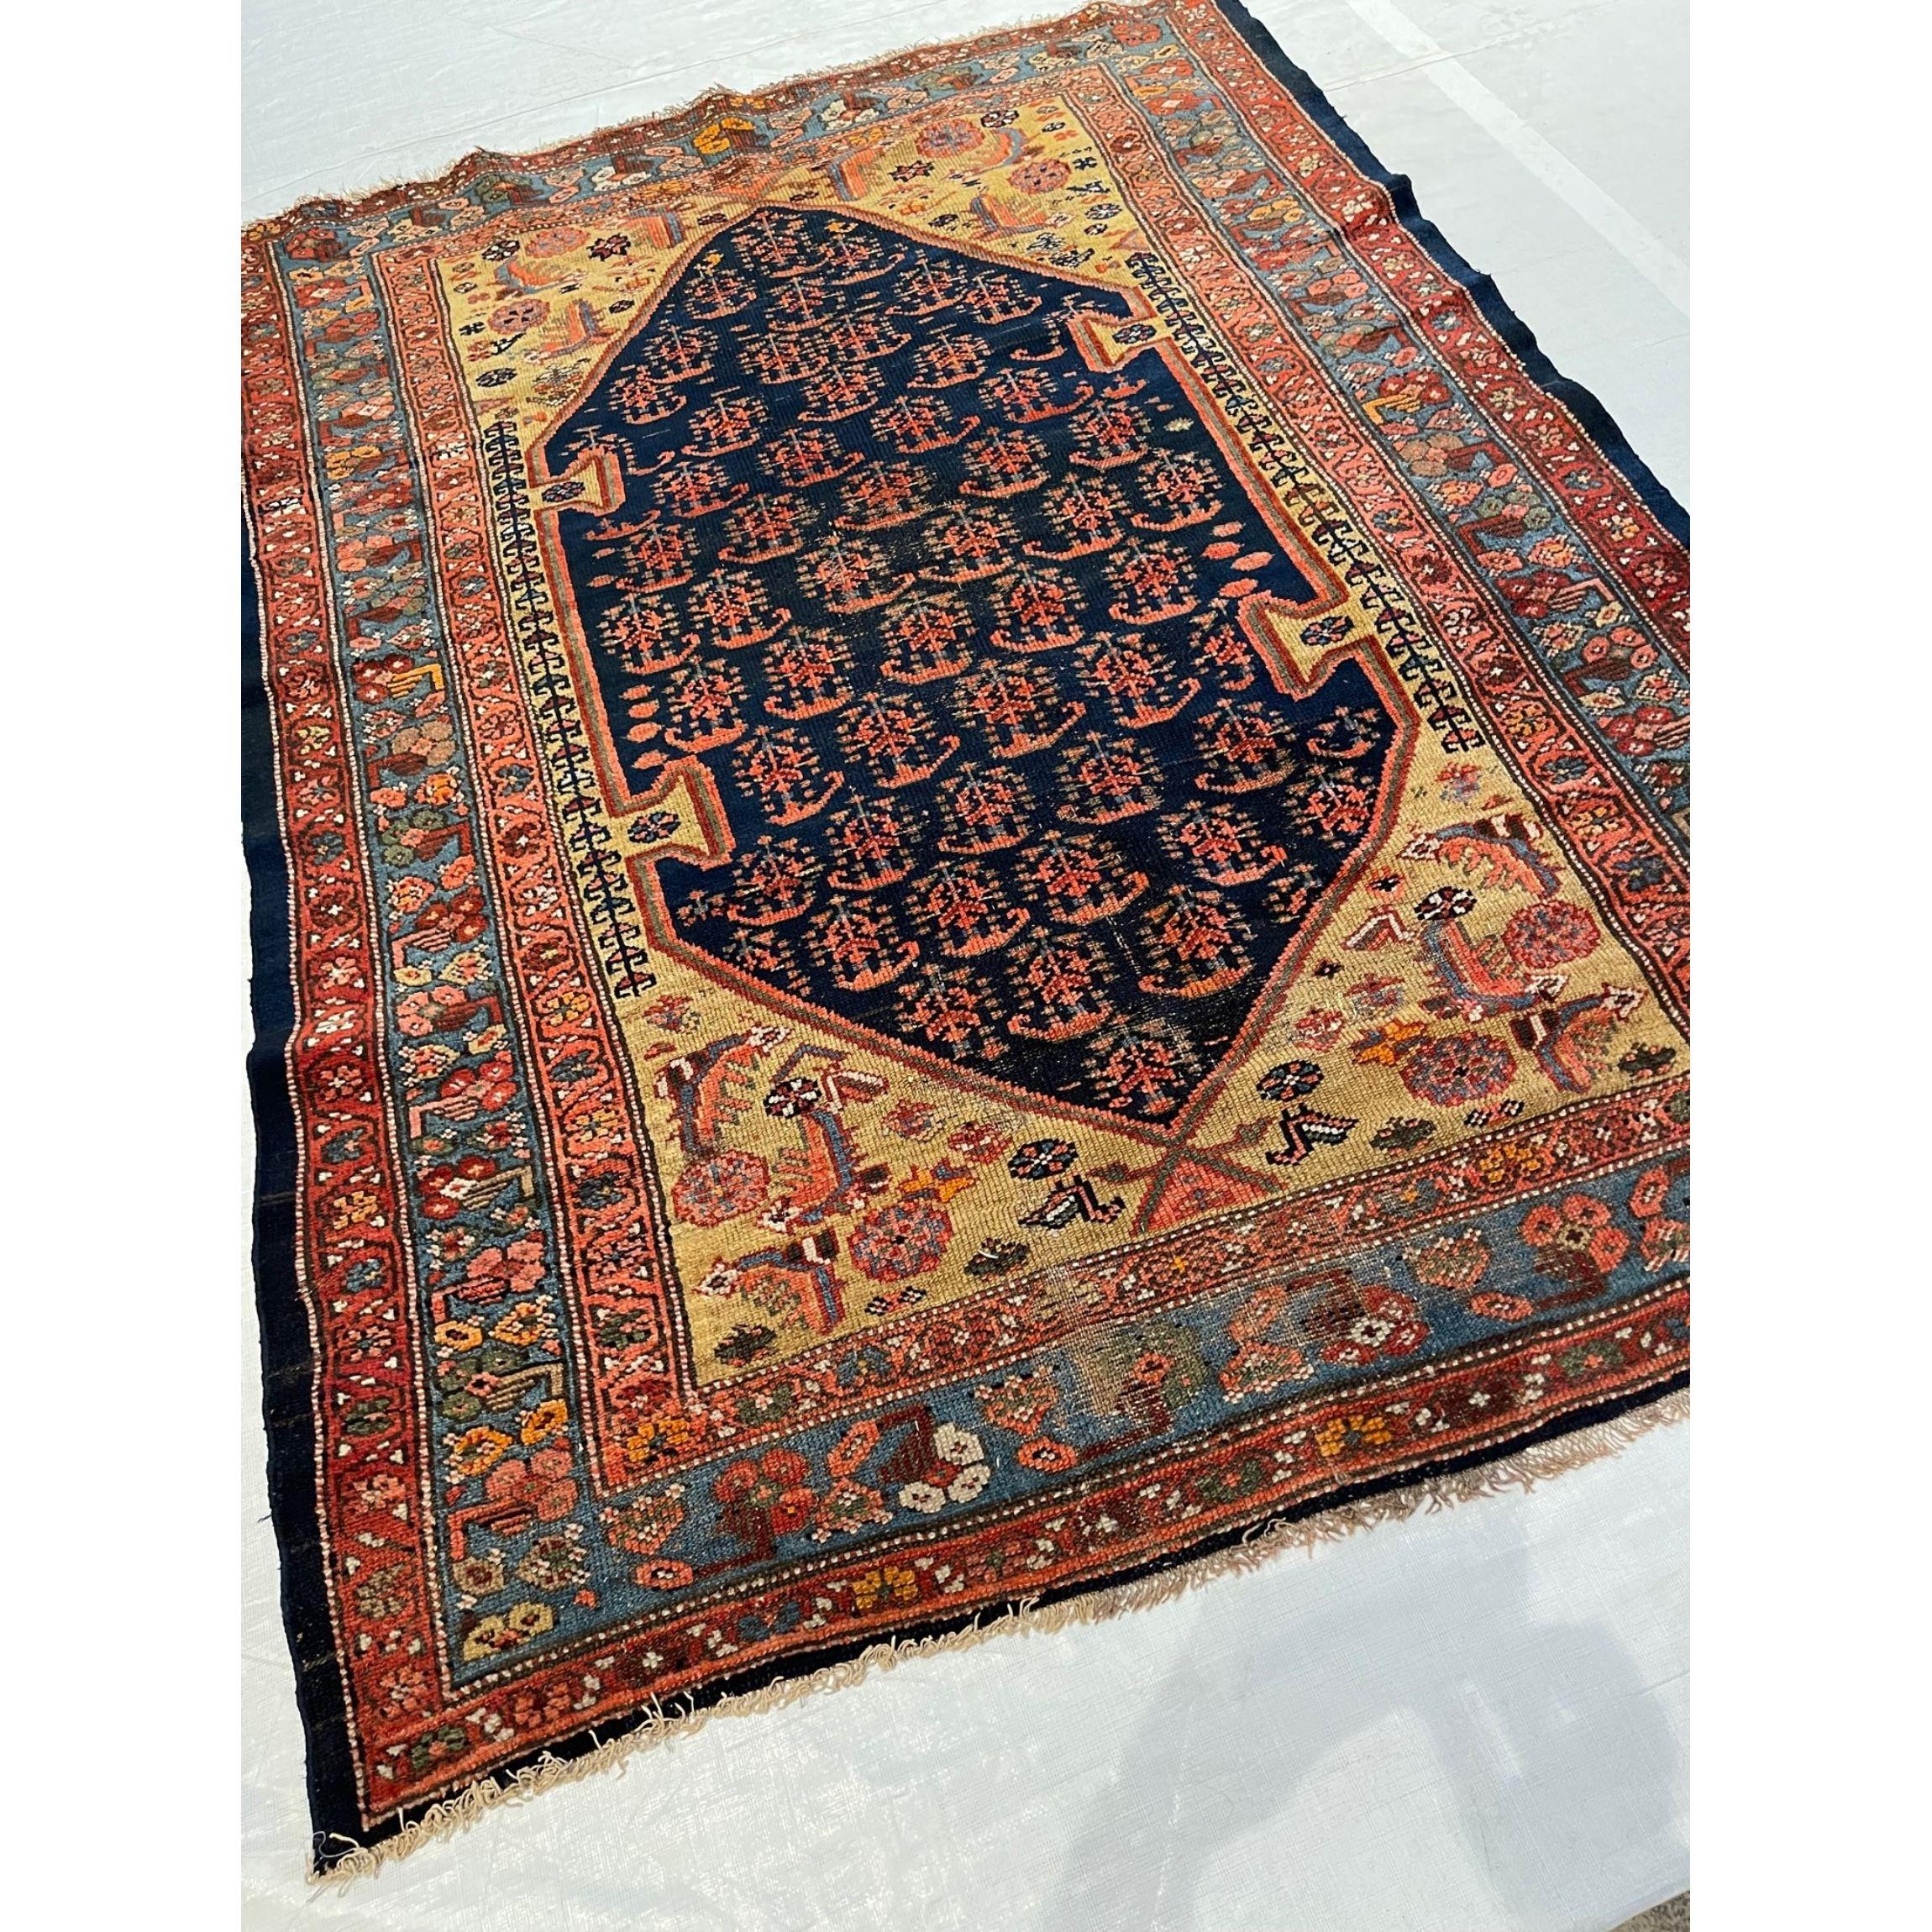 Antique Zanjan Rug 5.6x4.1, handmade and hand-knotted, wool on cotton foundation, tribal carpet, authentic Persian carpet, vegetable dyes, tribal carpet from mid-19th Century 